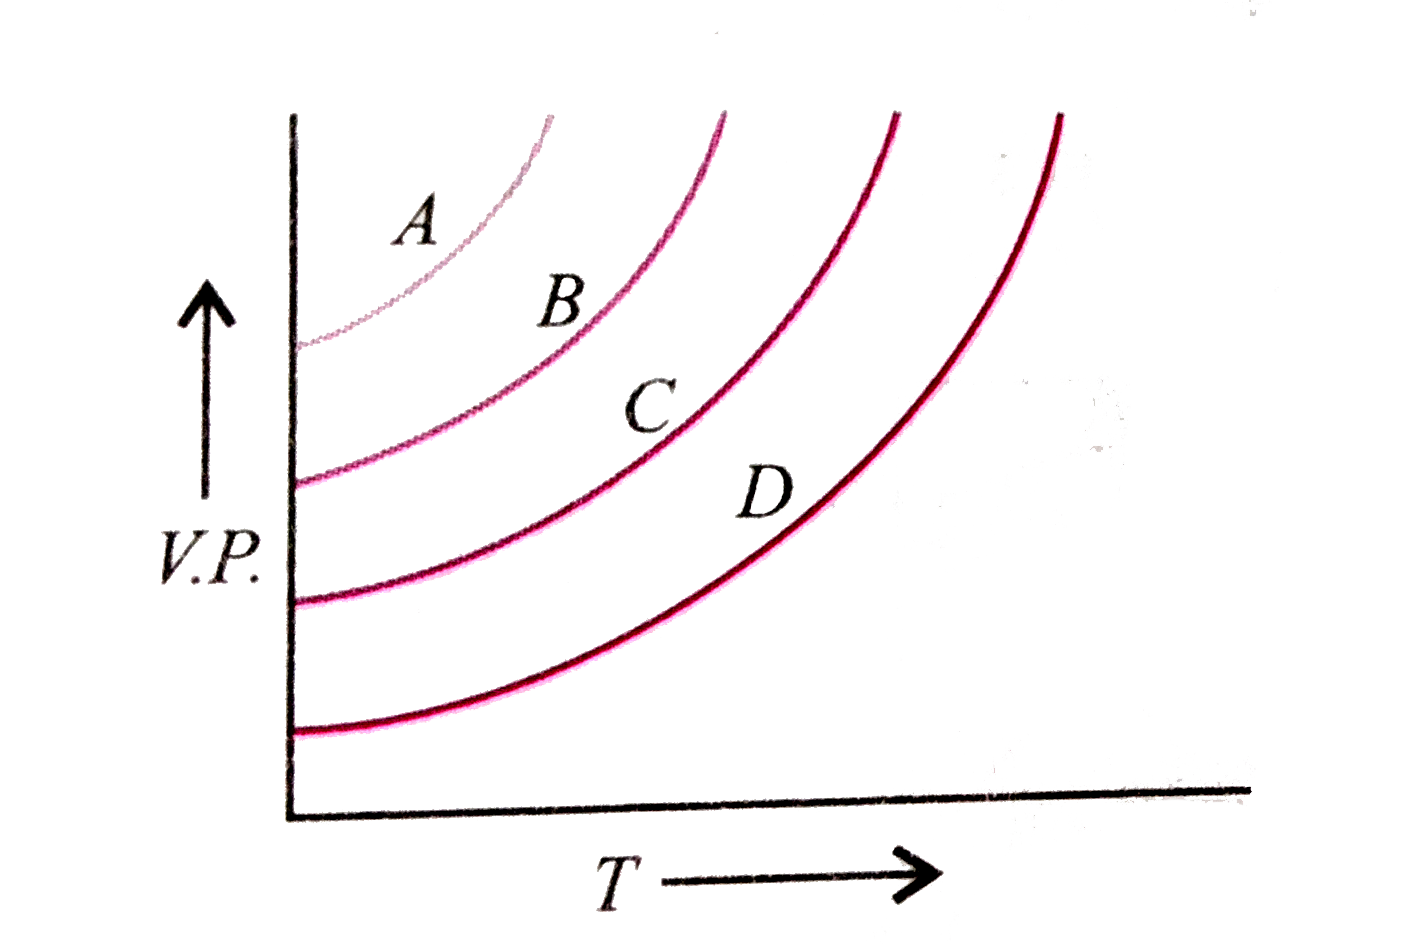 The given graph shows the vapour pressure - temperature curves for some liquids      Liquids A,B, C and D respectively are